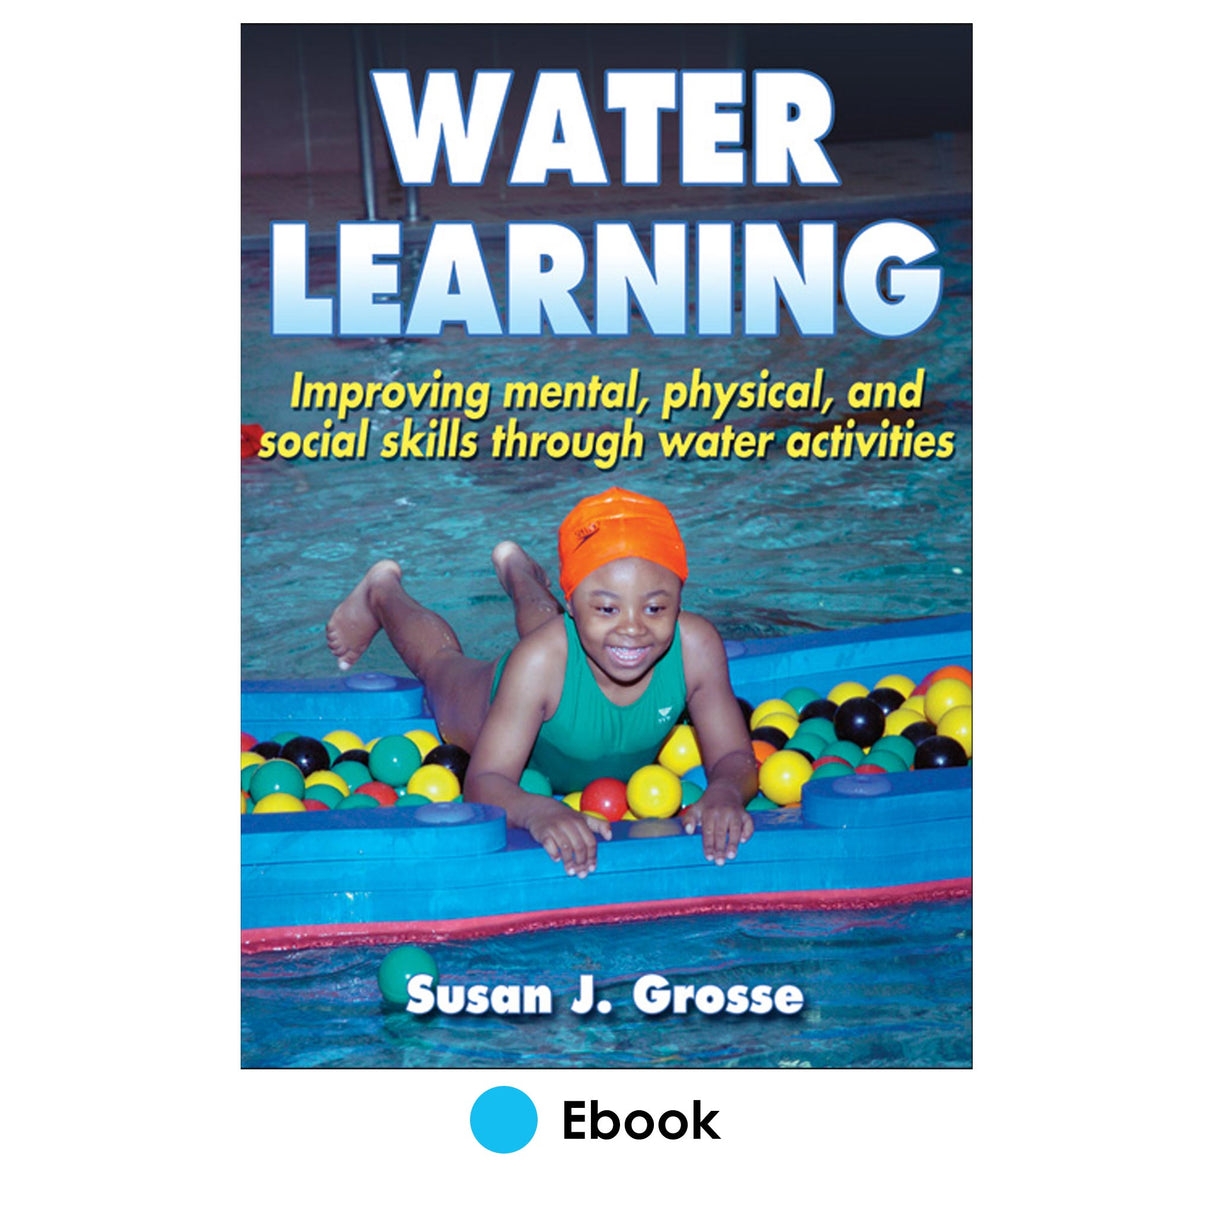 Water Learning PDF